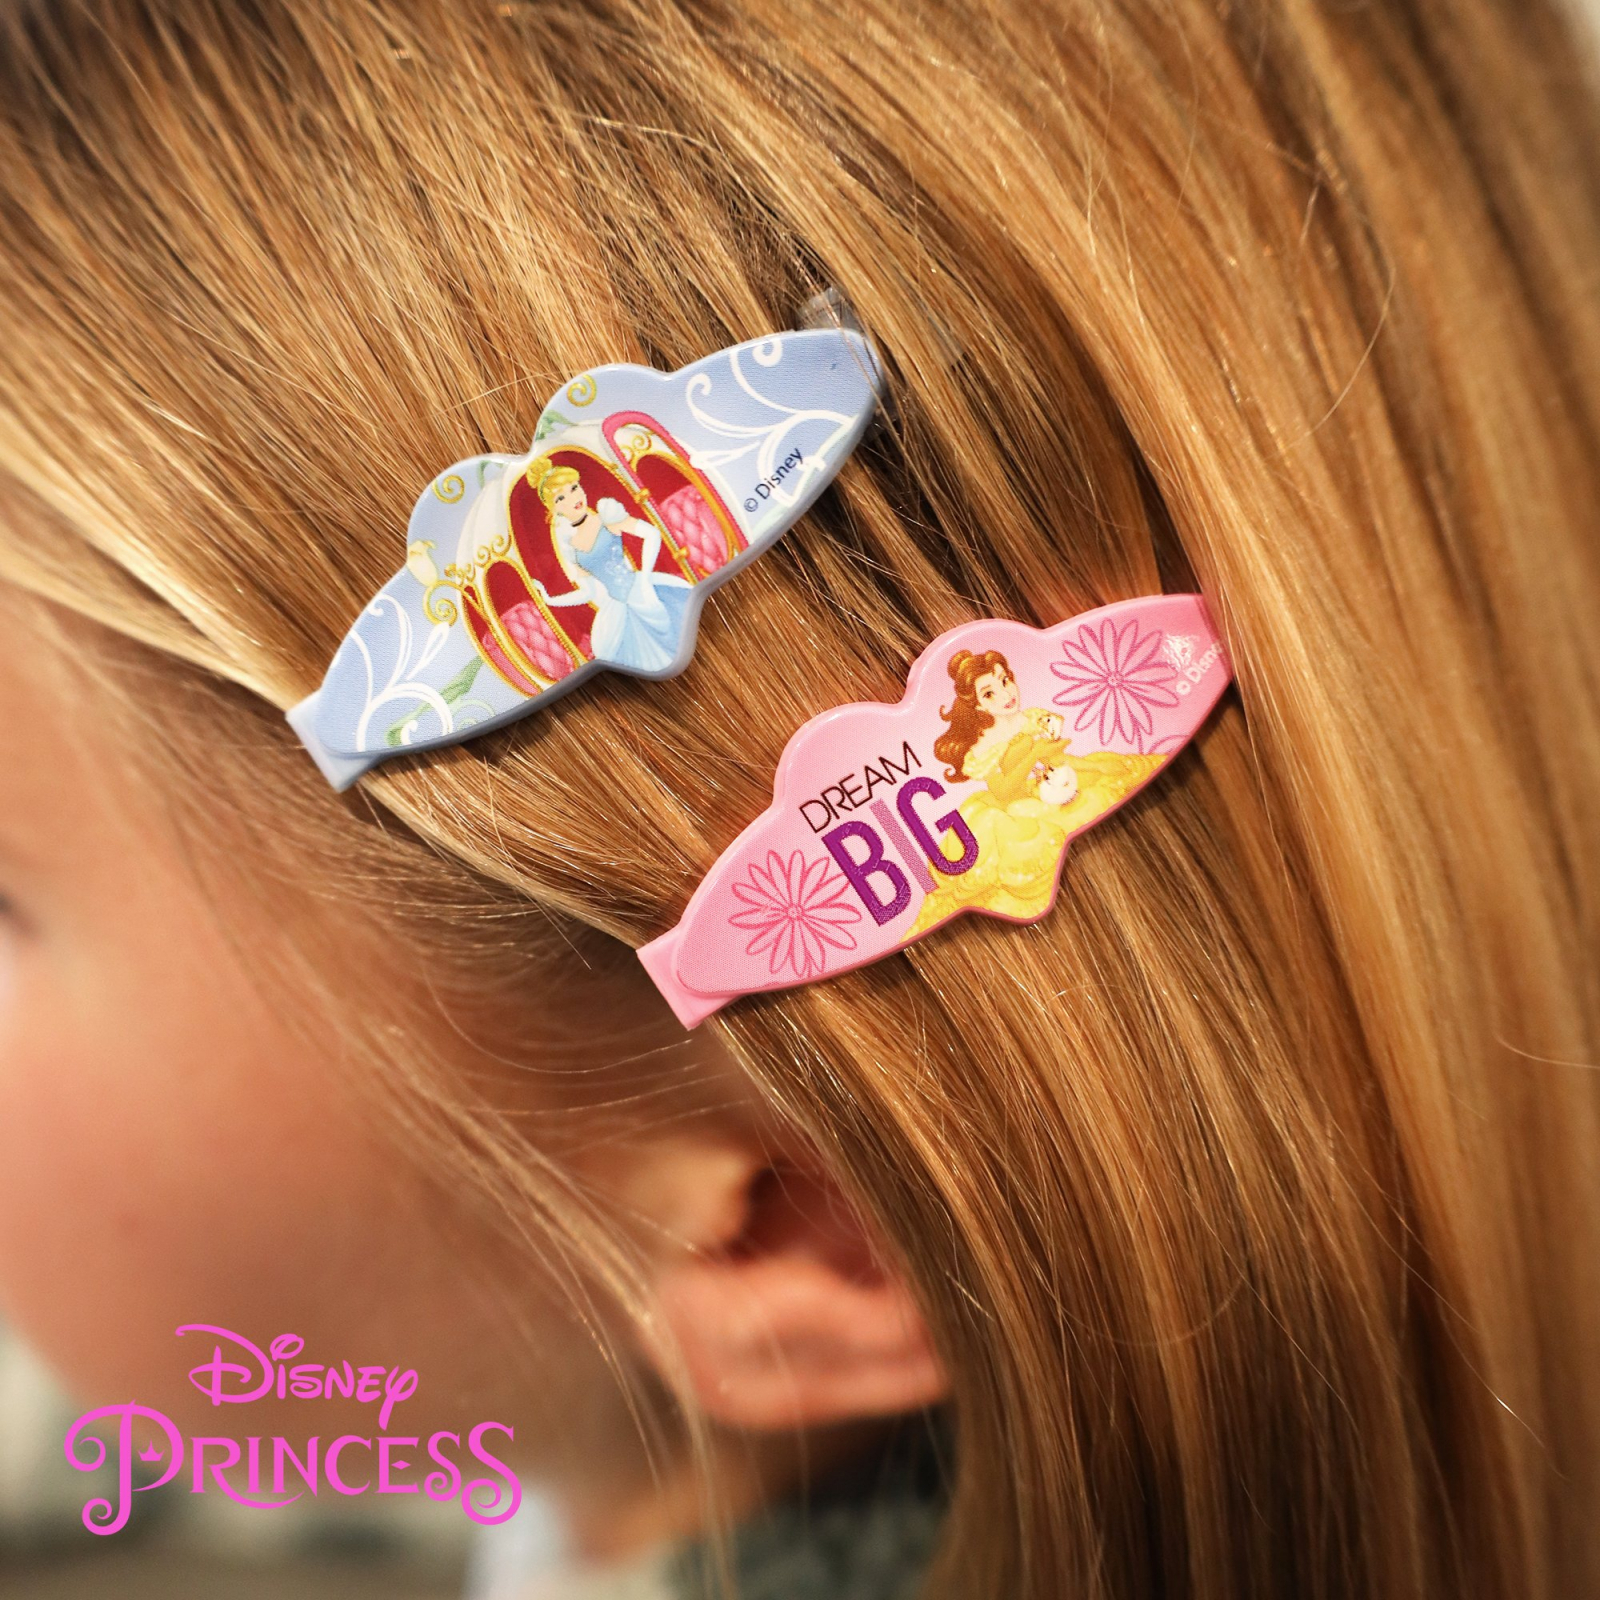 Disney Princess Girls Hair Accessories Backpack with Comb Mirror Hair Ponies - image 3 of 9